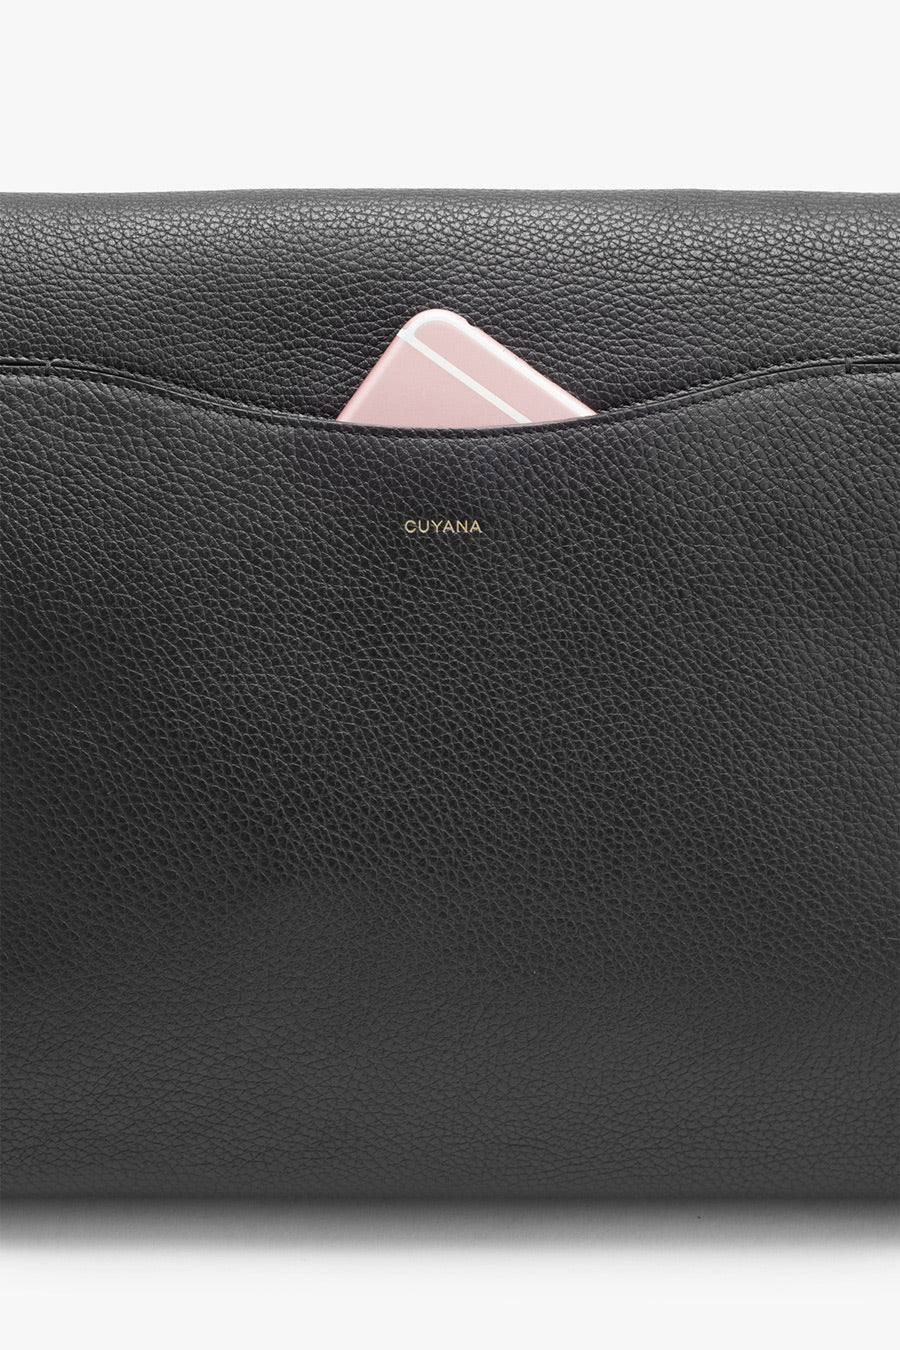 Close-up of a textured bag with a brand name and a phone peeking out.